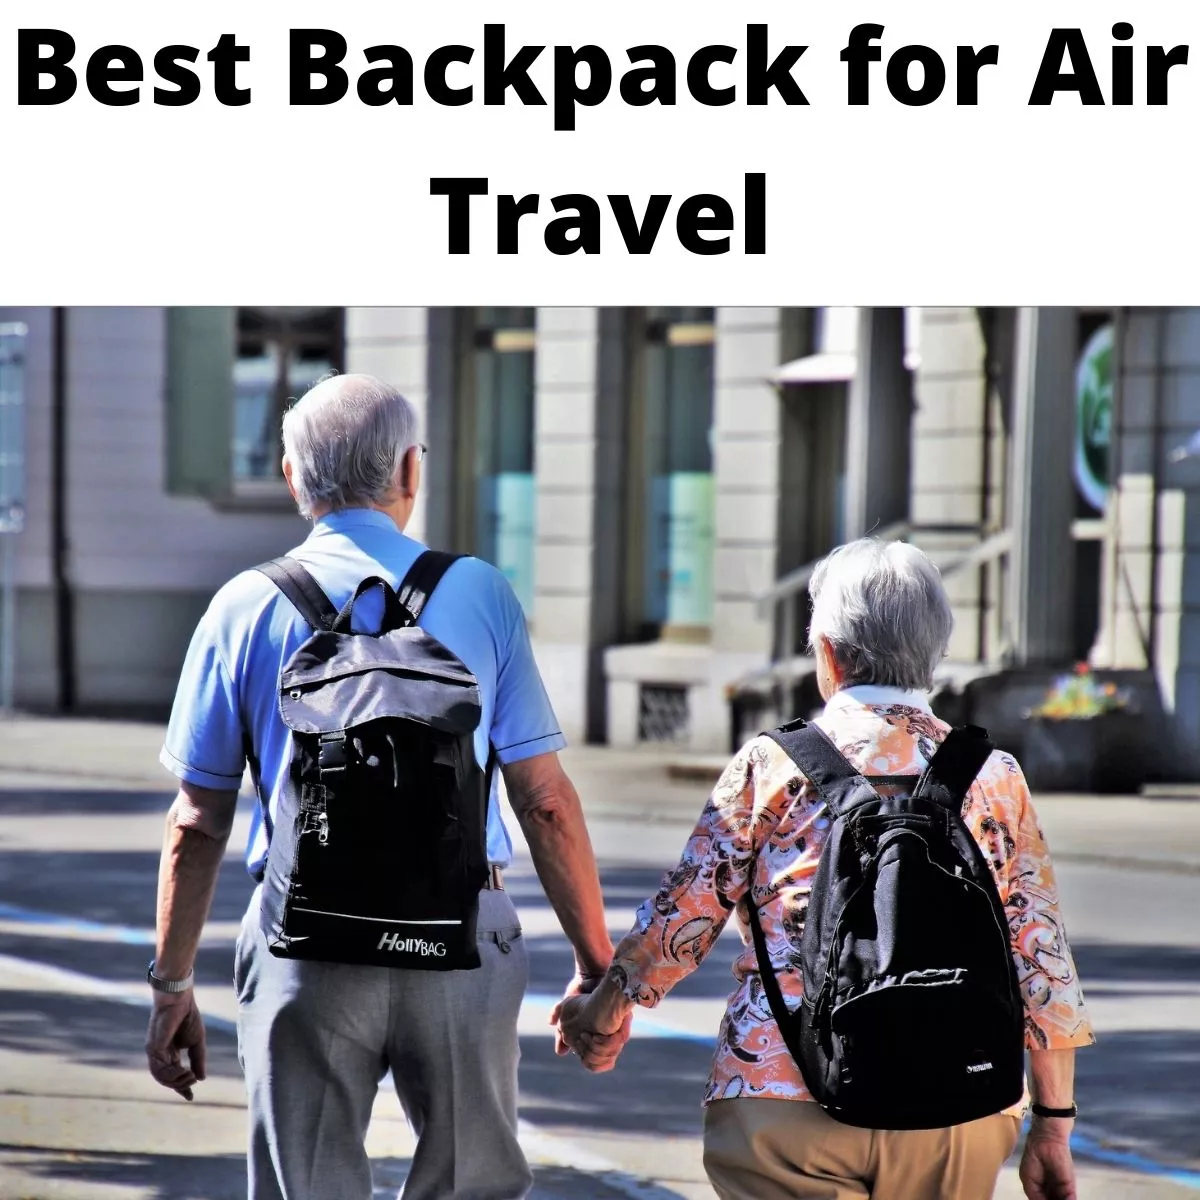 Best Backpack for Air Travel UK Reviews